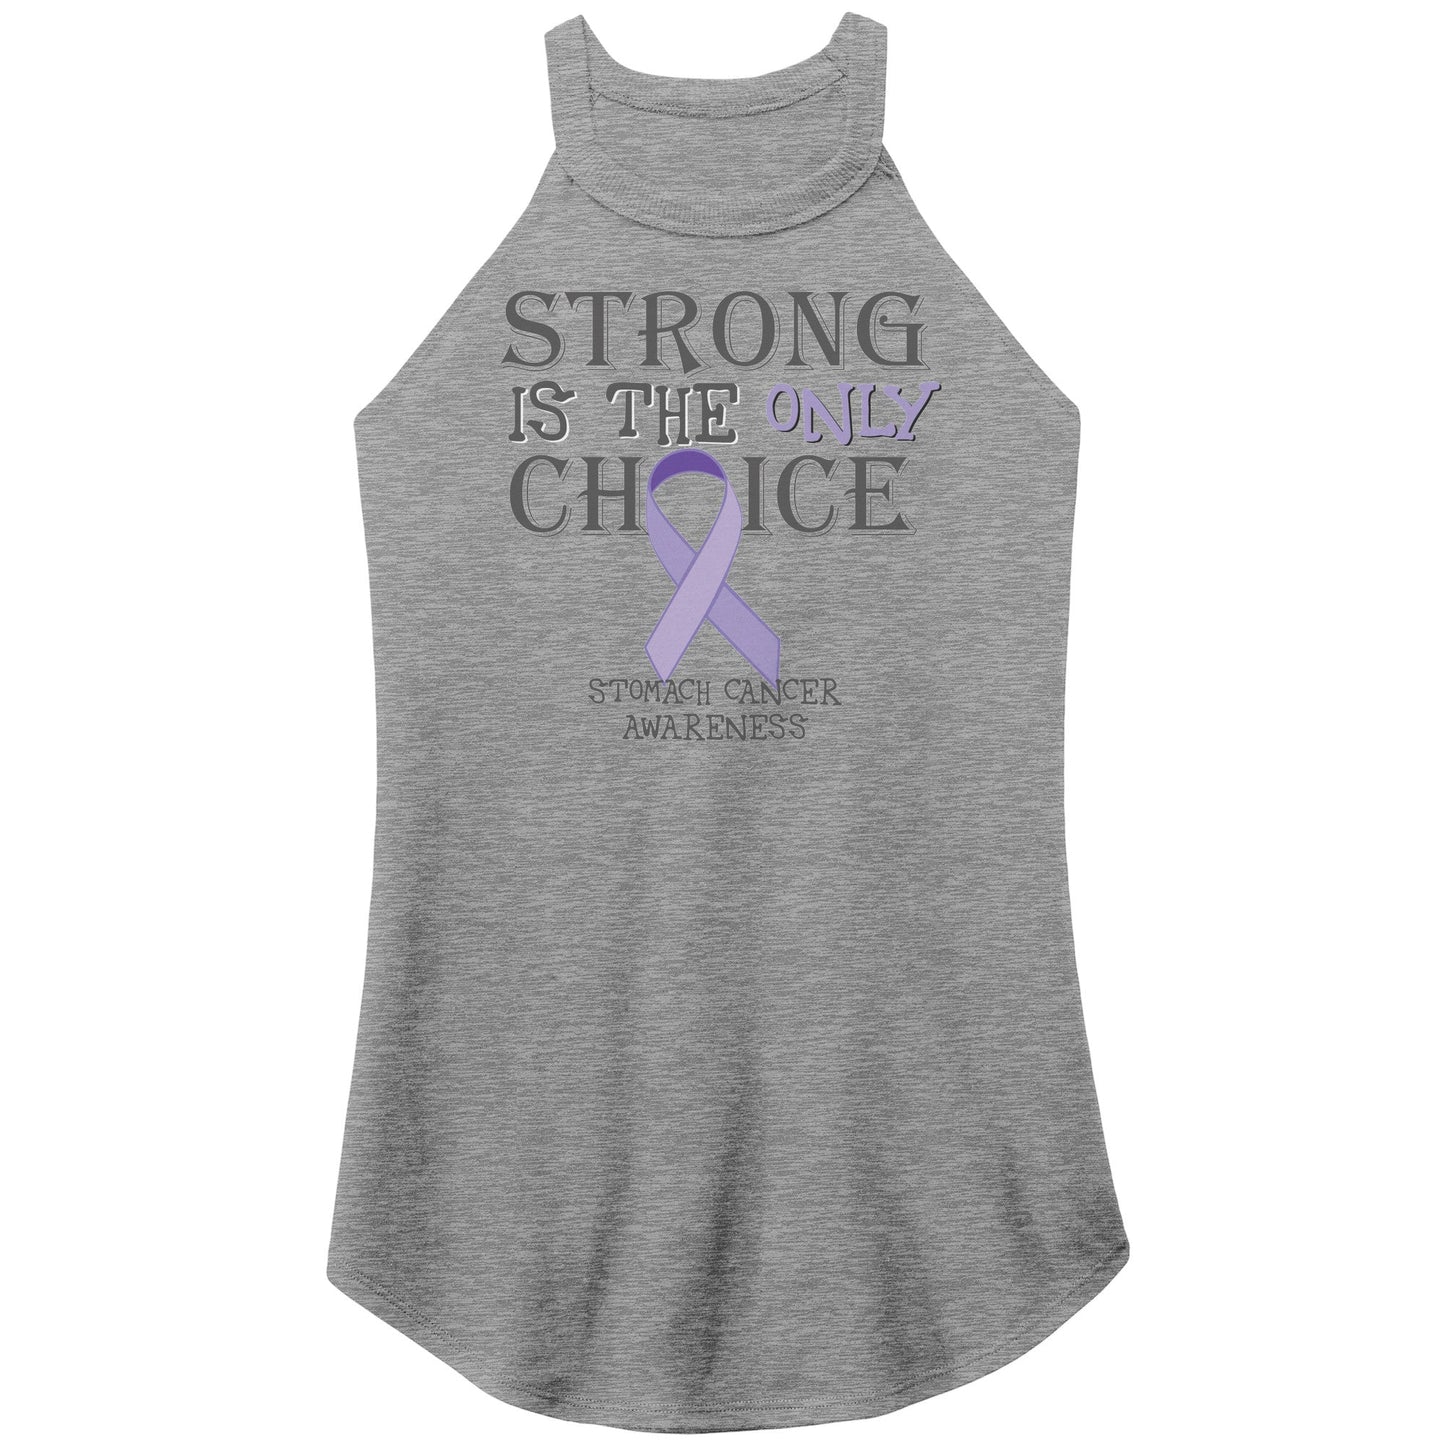 Strong is the Only Choice -Stomach Cancer Awareness T-Shirt, Hoodie, Tank |x|